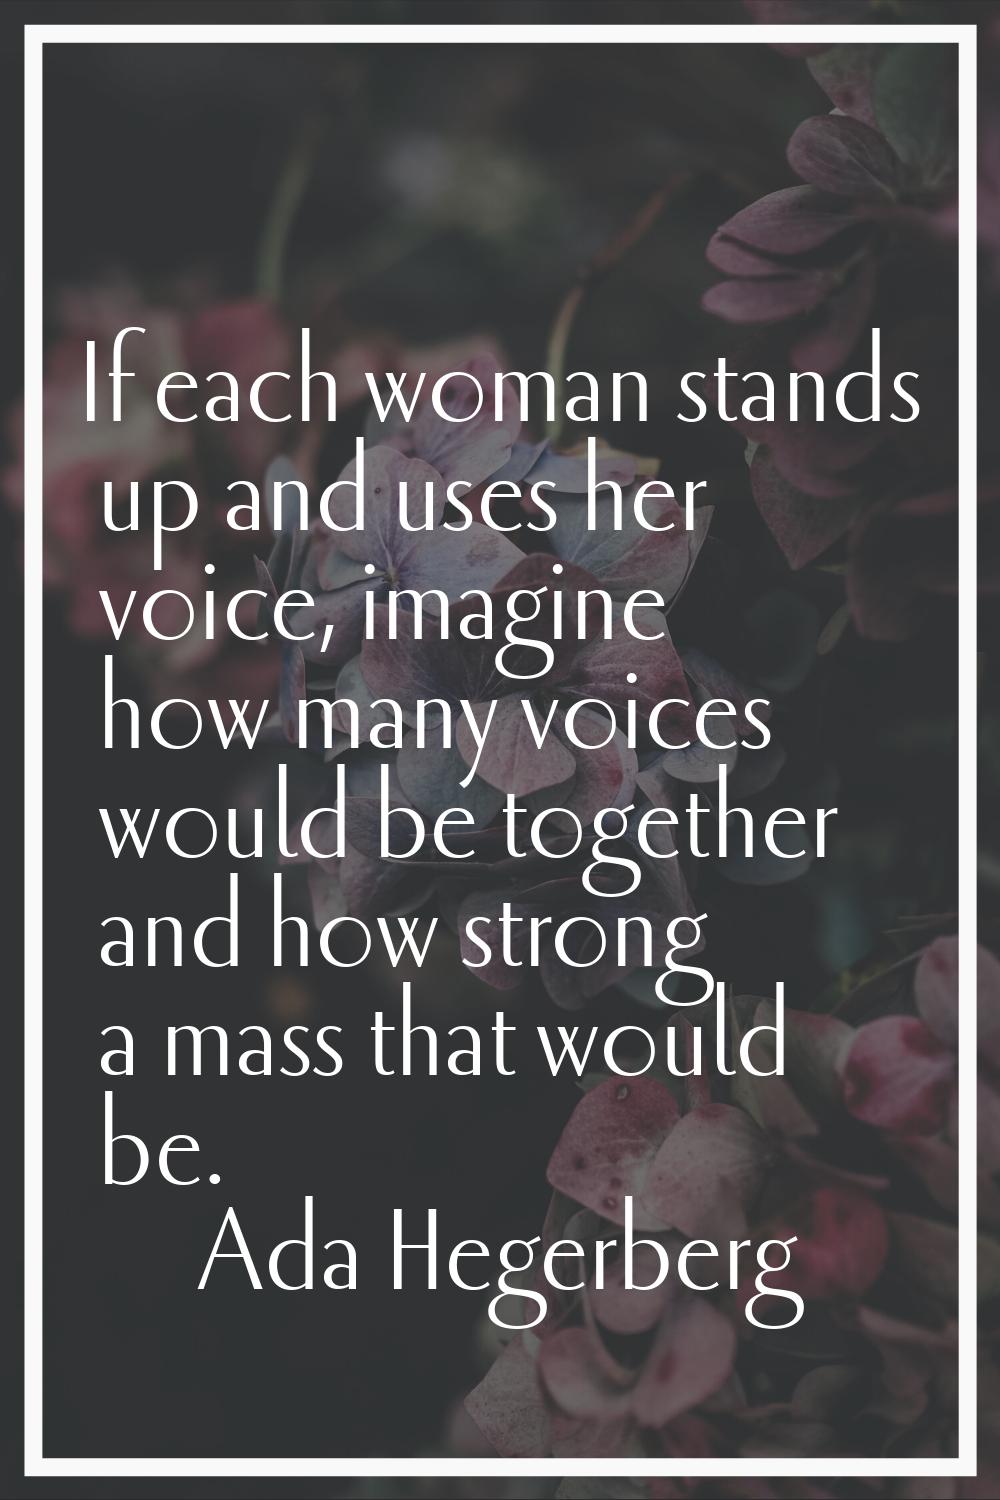 If each woman stands up and uses her voice, imagine how many voices would be together and how stron